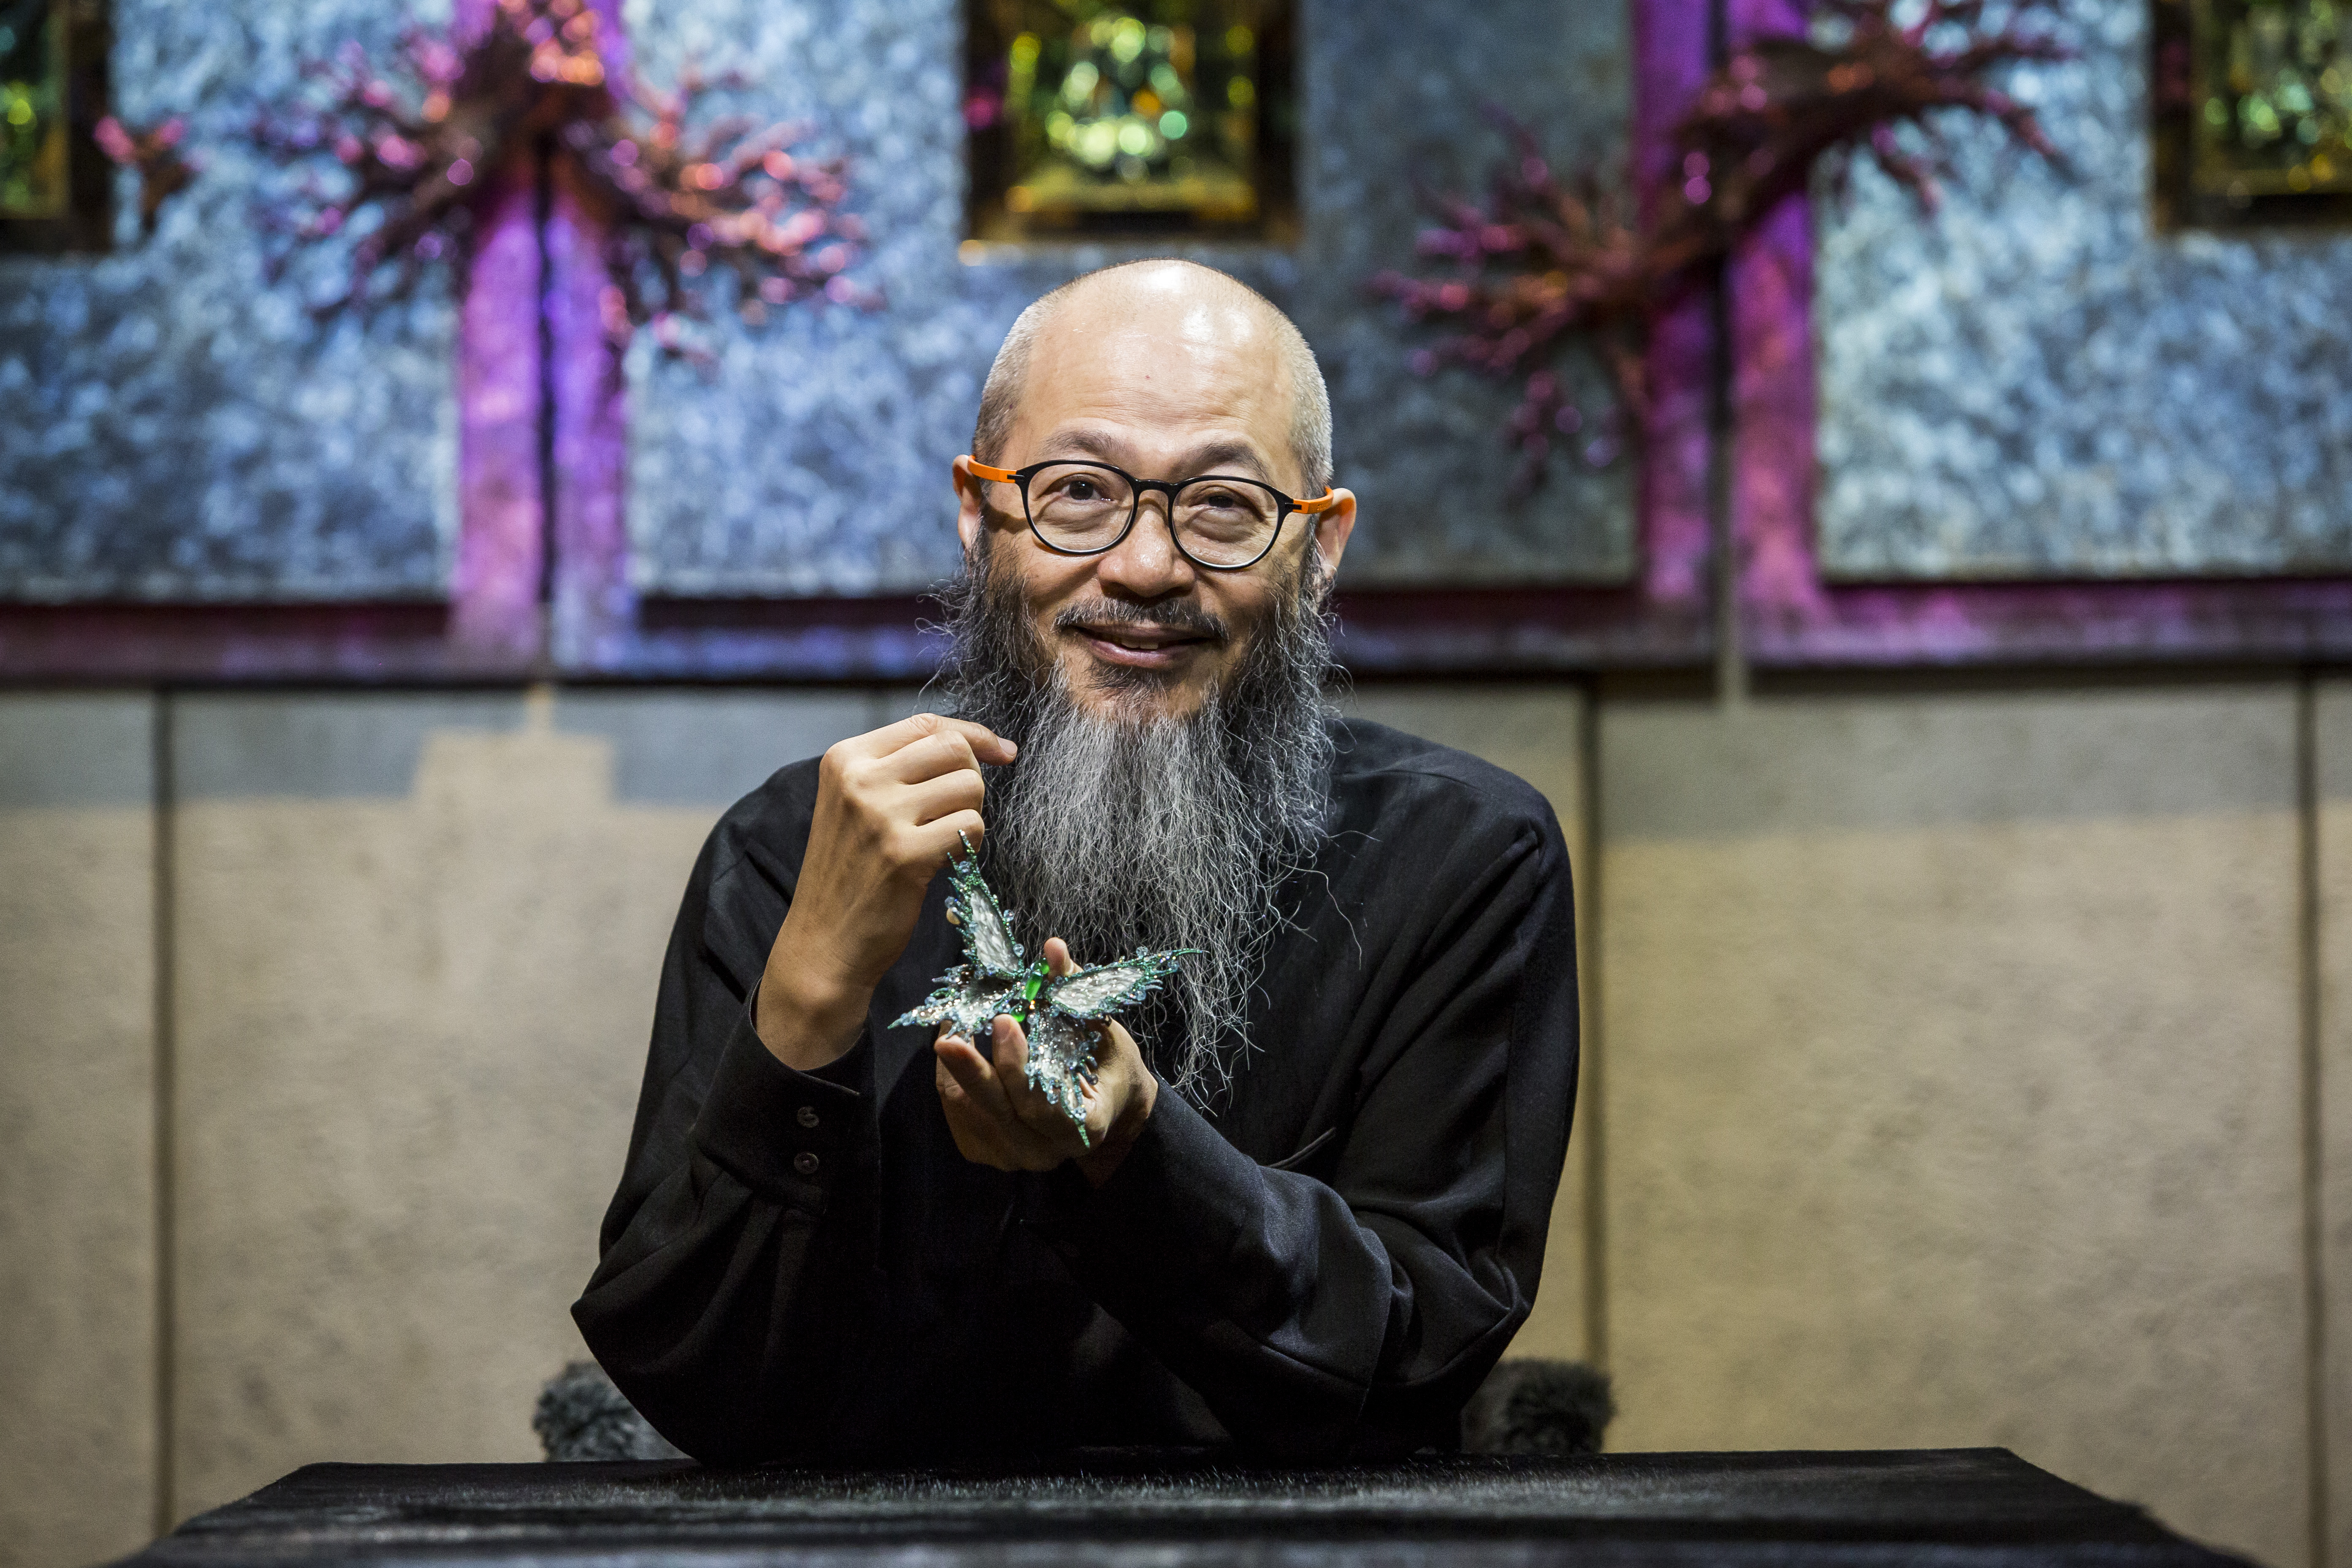 Christie’s exhibition Wallace Chan Jewellery creator